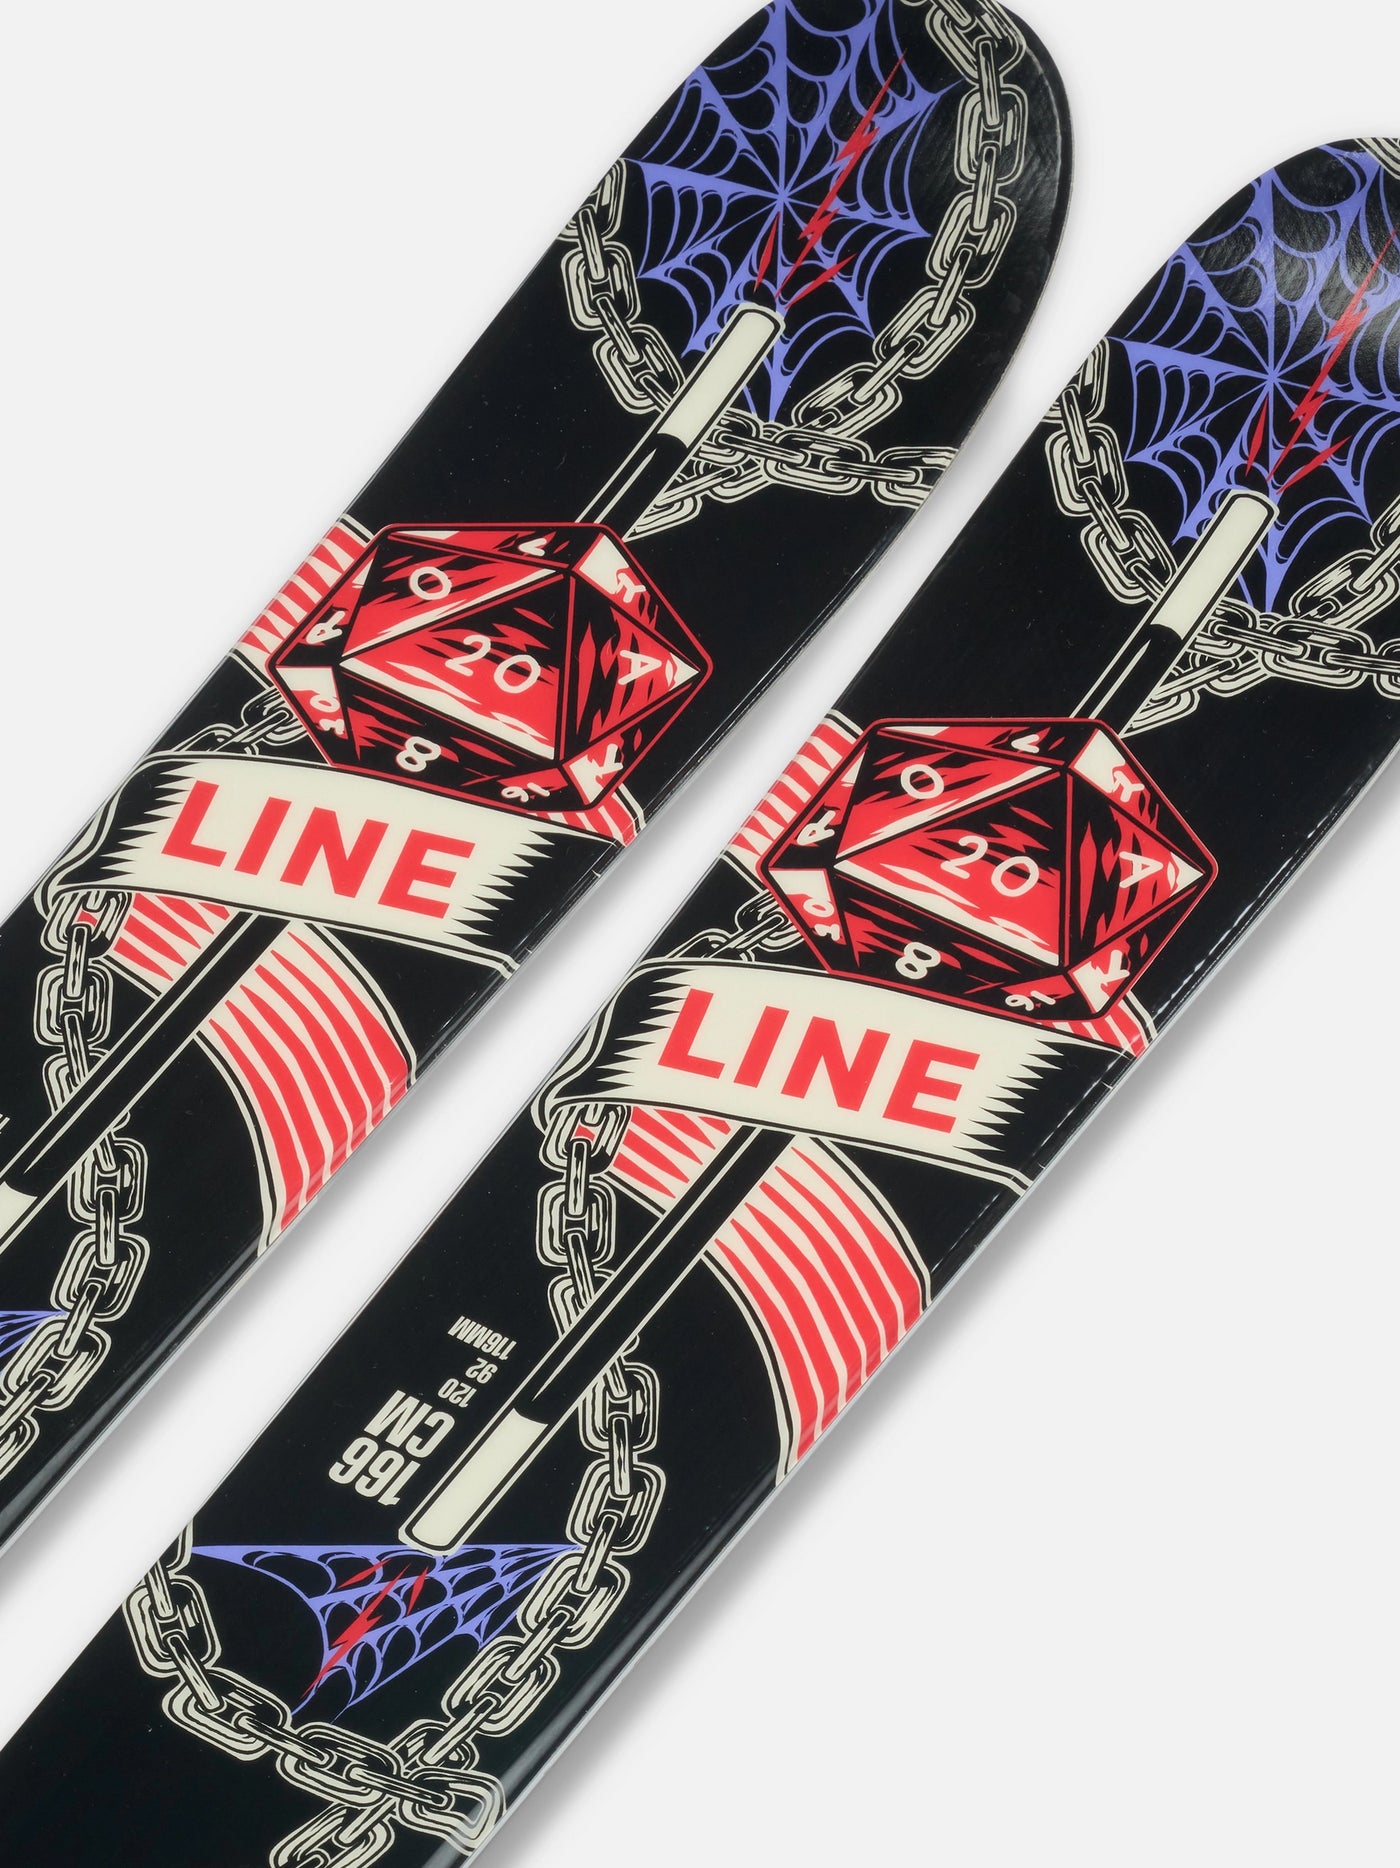 LINE Skis HONEY BADGER TBL 2024 Includes Marker Squire 11 Bindings